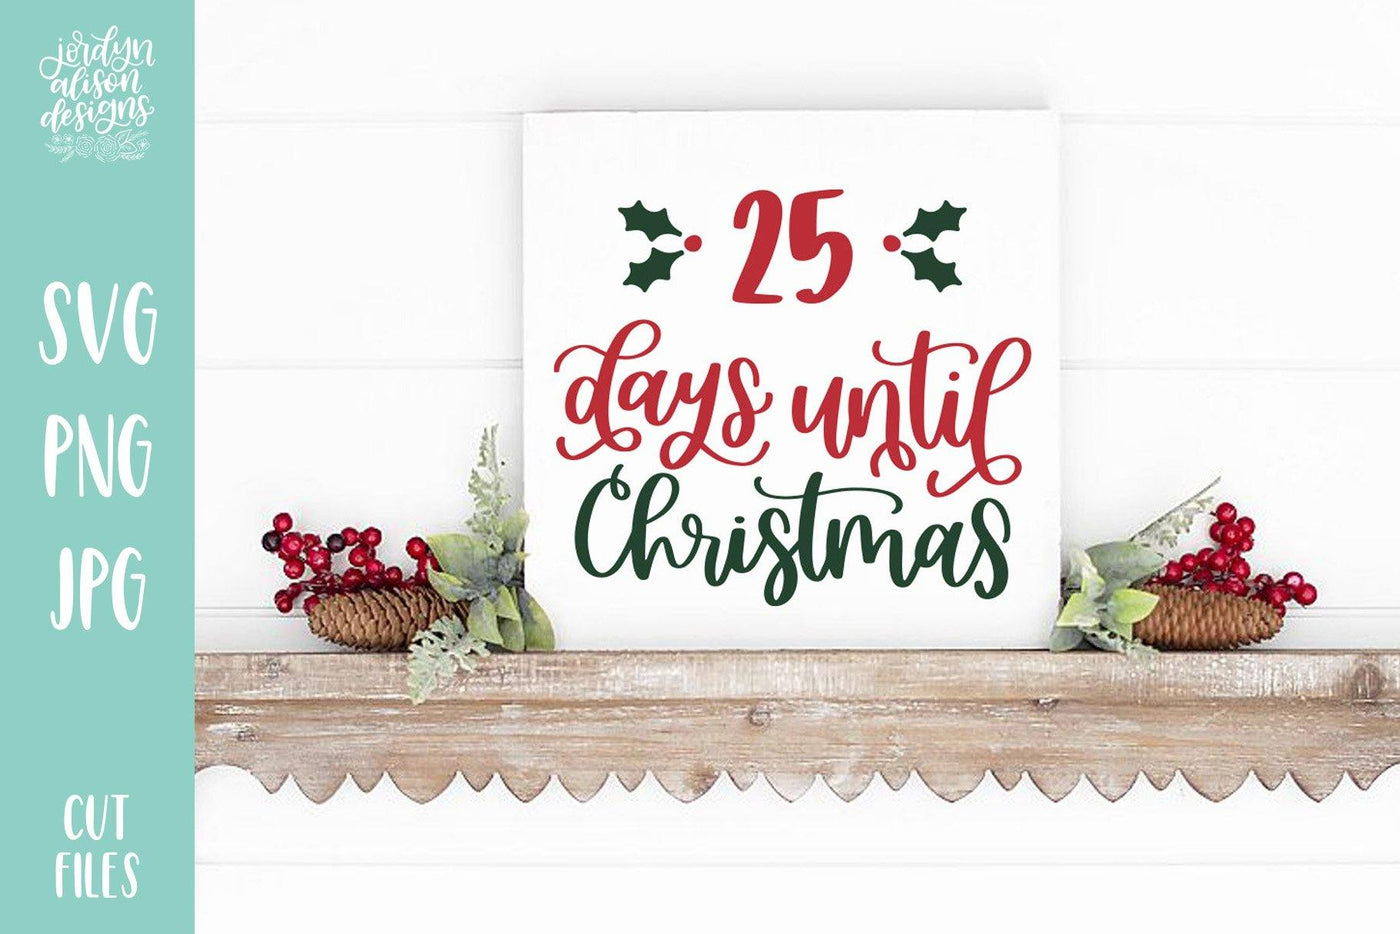 White Square canvas with holly leaves, and text "25 days until Christmas"